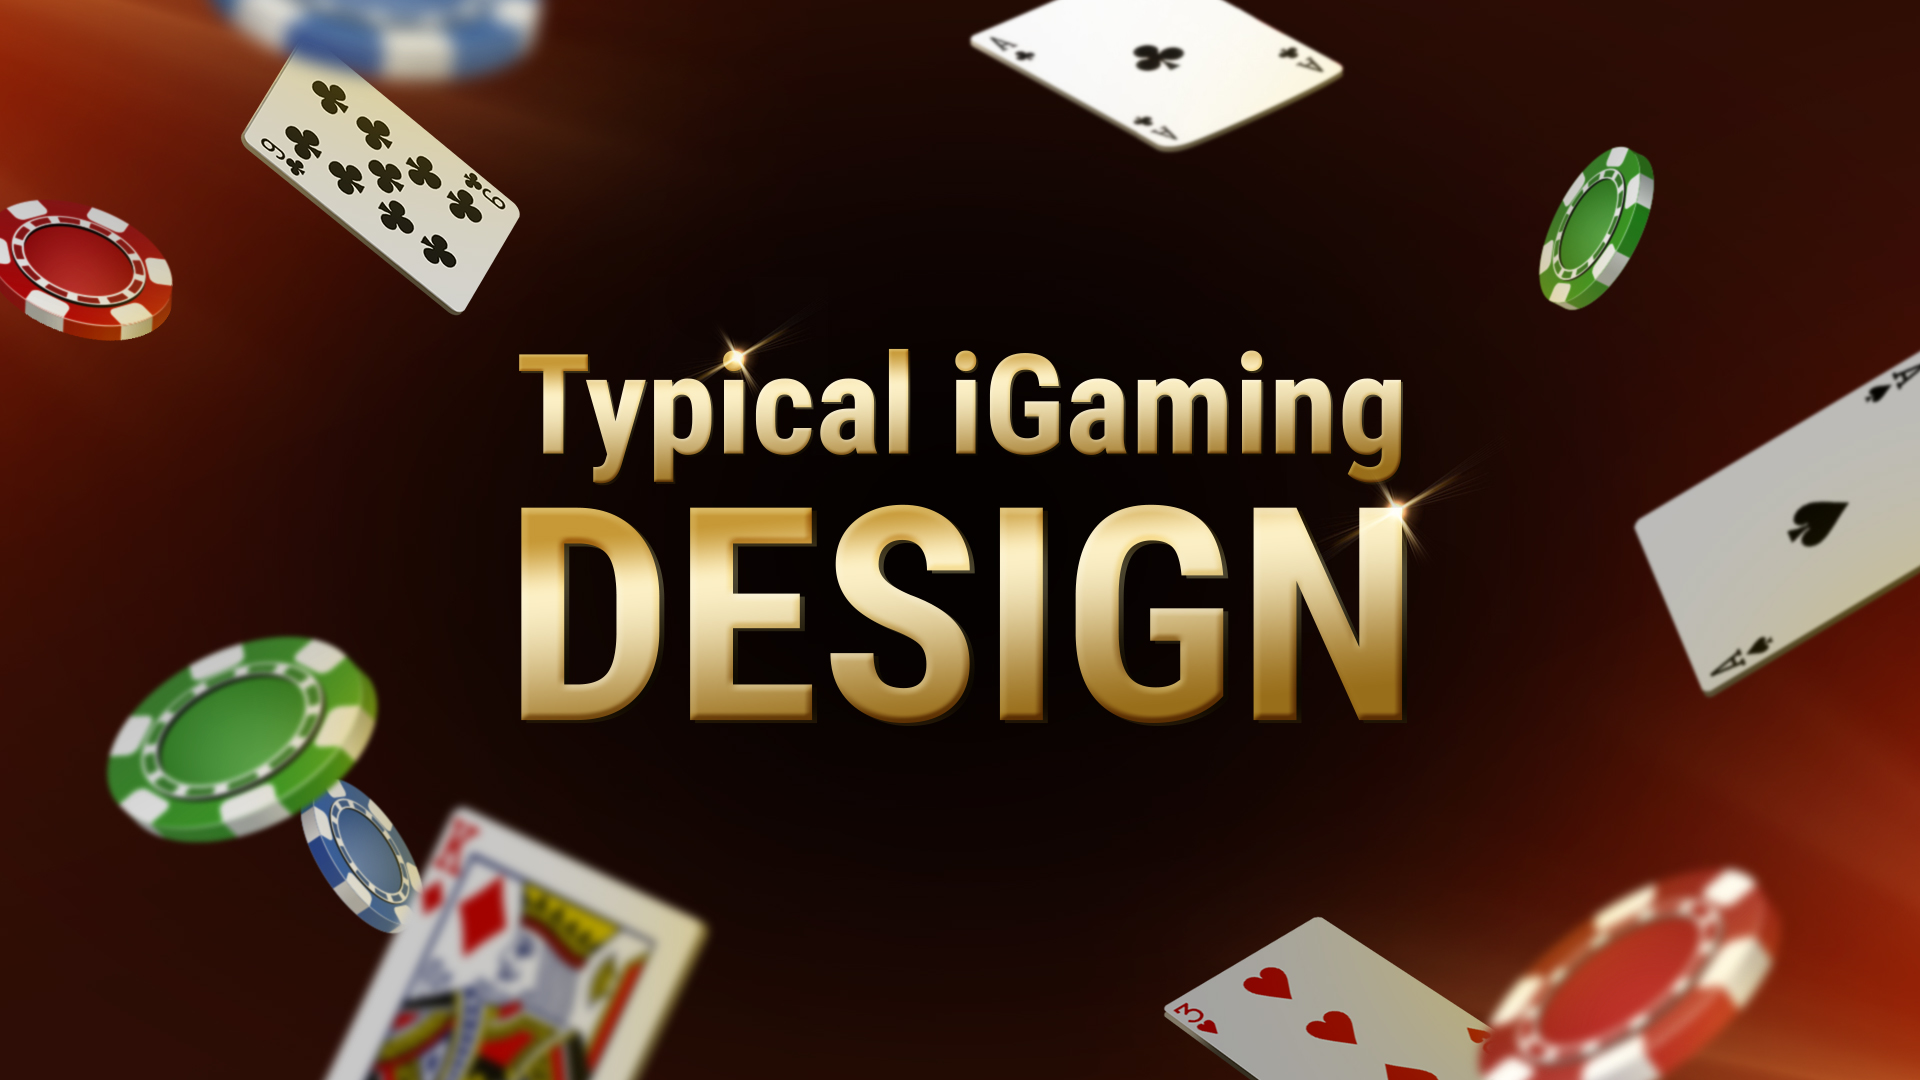 Typical iGaming Design